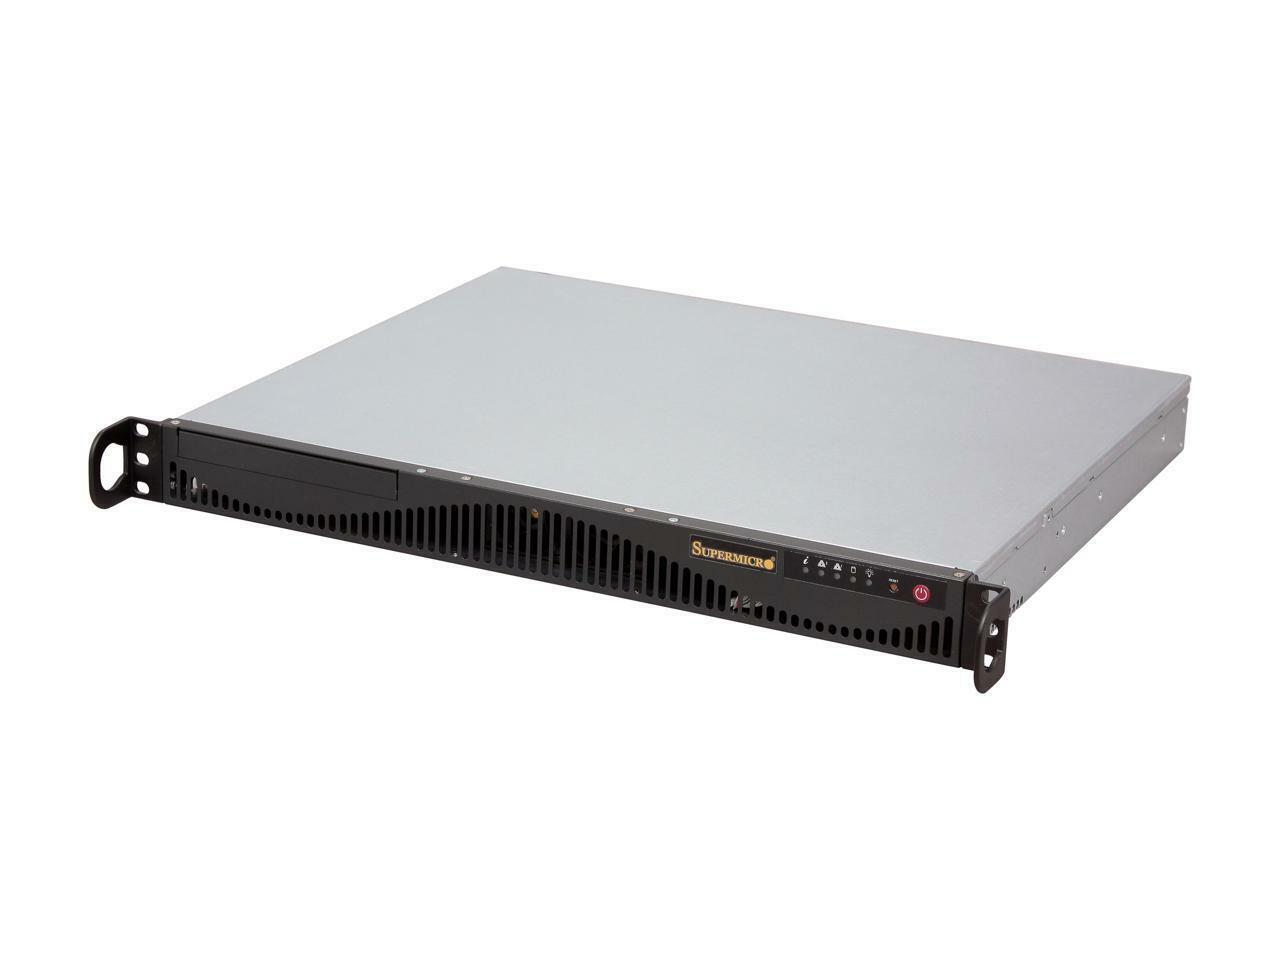 Supermicro SYS-5017R-MF Barebones Server with CPU NEW, IN STOCK, 5 Year Warranty